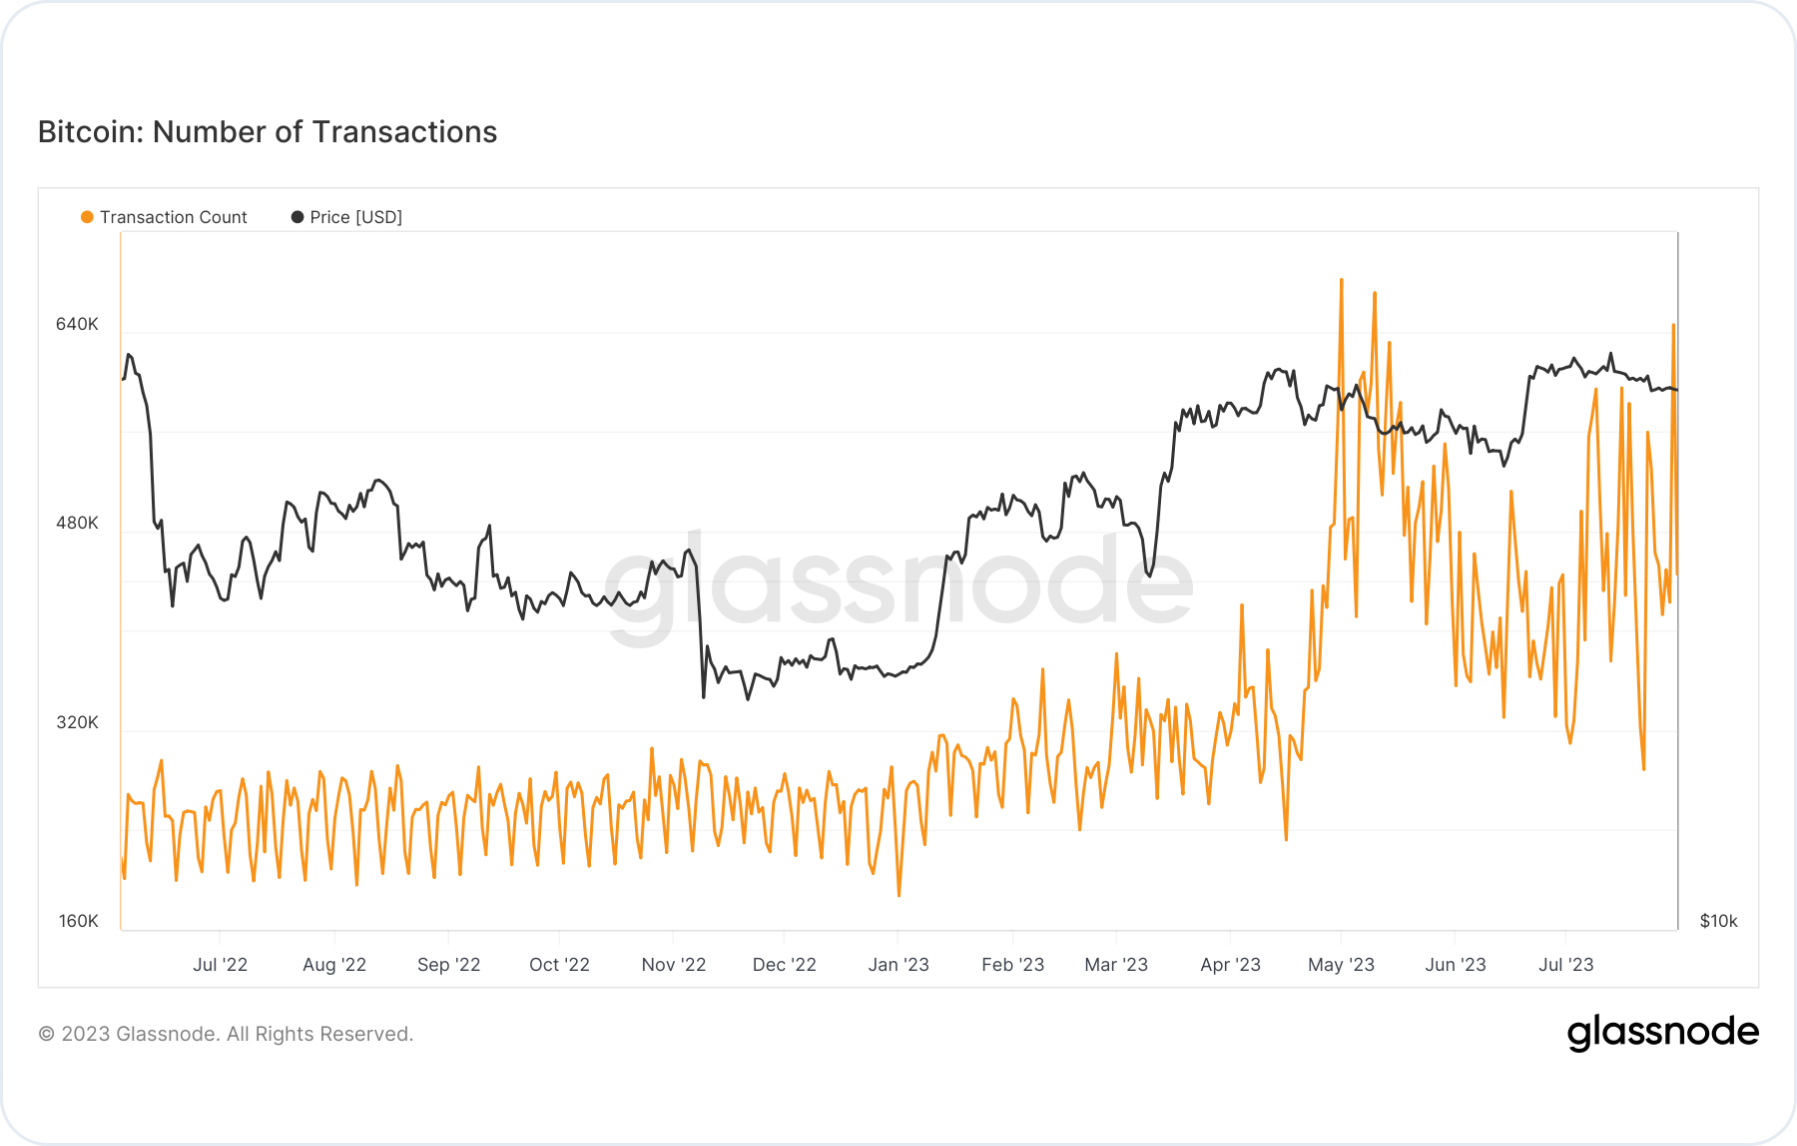 btc-number-of-transactions-july